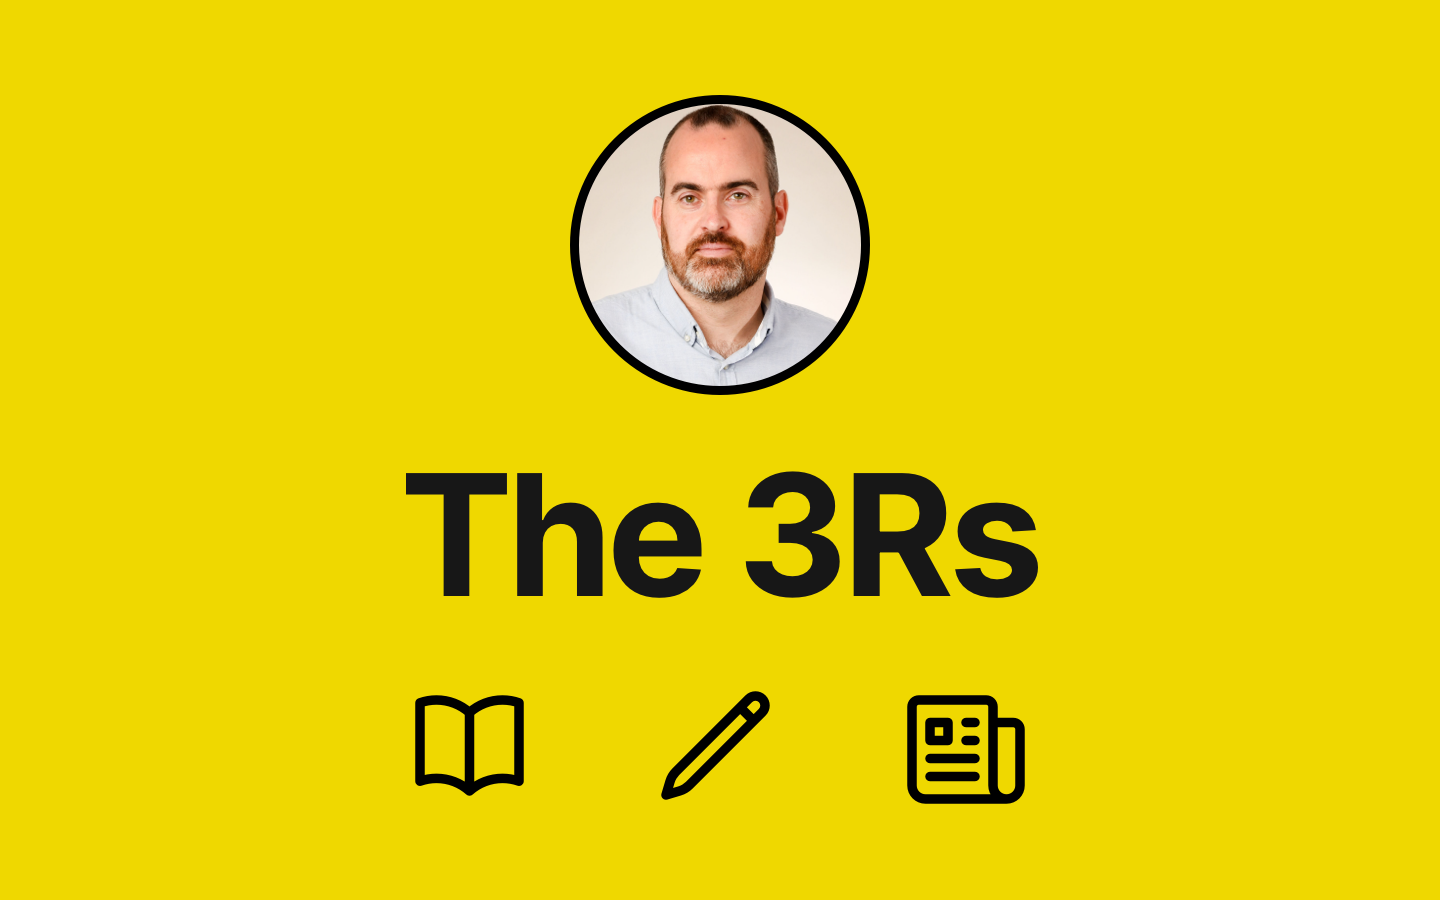 The 3Rs - Reading, w®iting, and research to be interested in #27 feature image